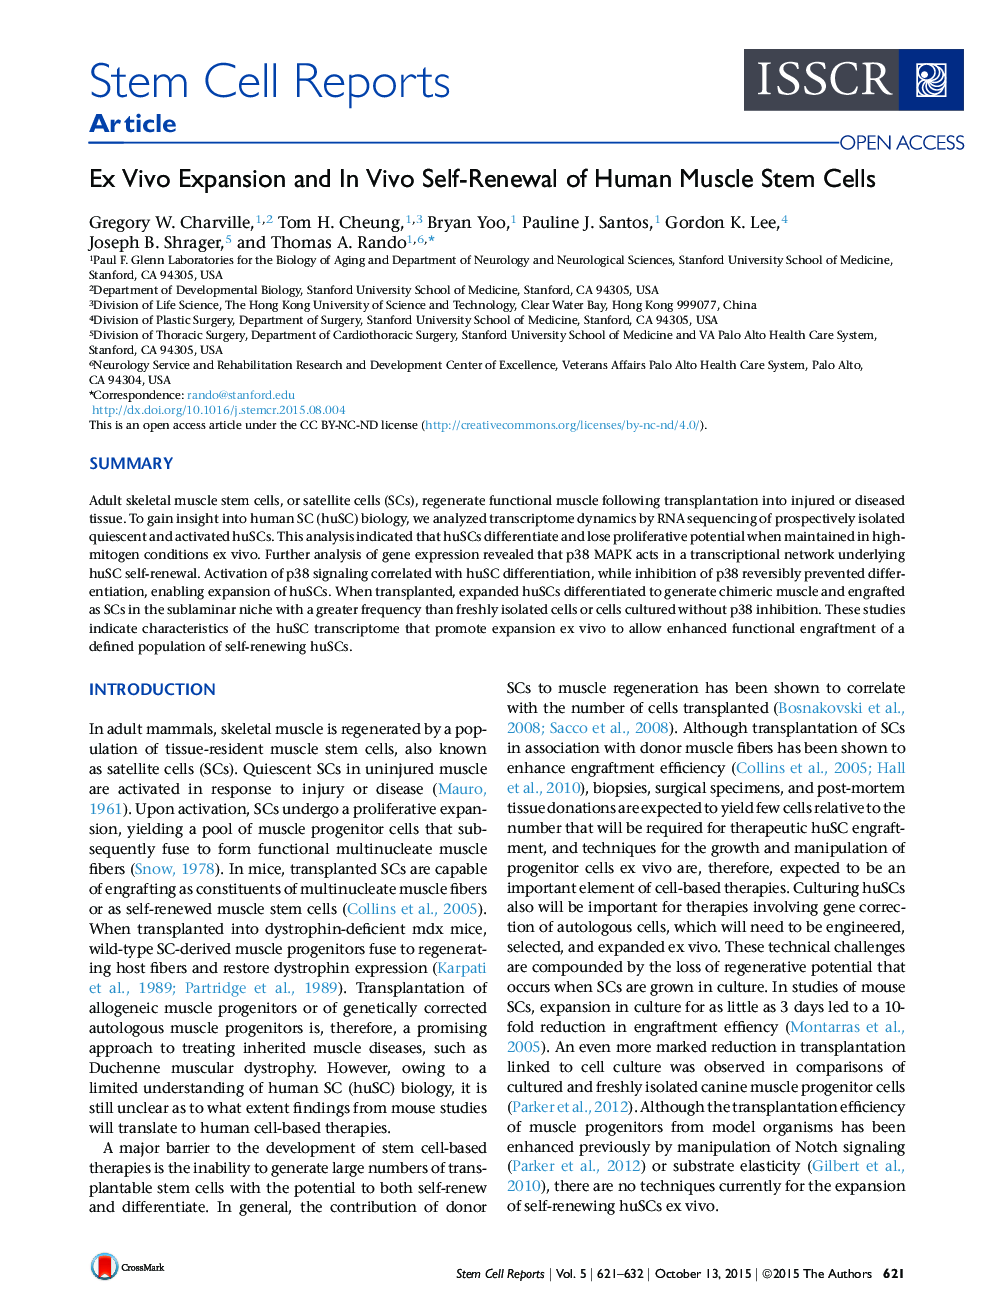 Ex Vivo Expansion and In Vivo Self-Renewal of Human Muscle Stem Cells 